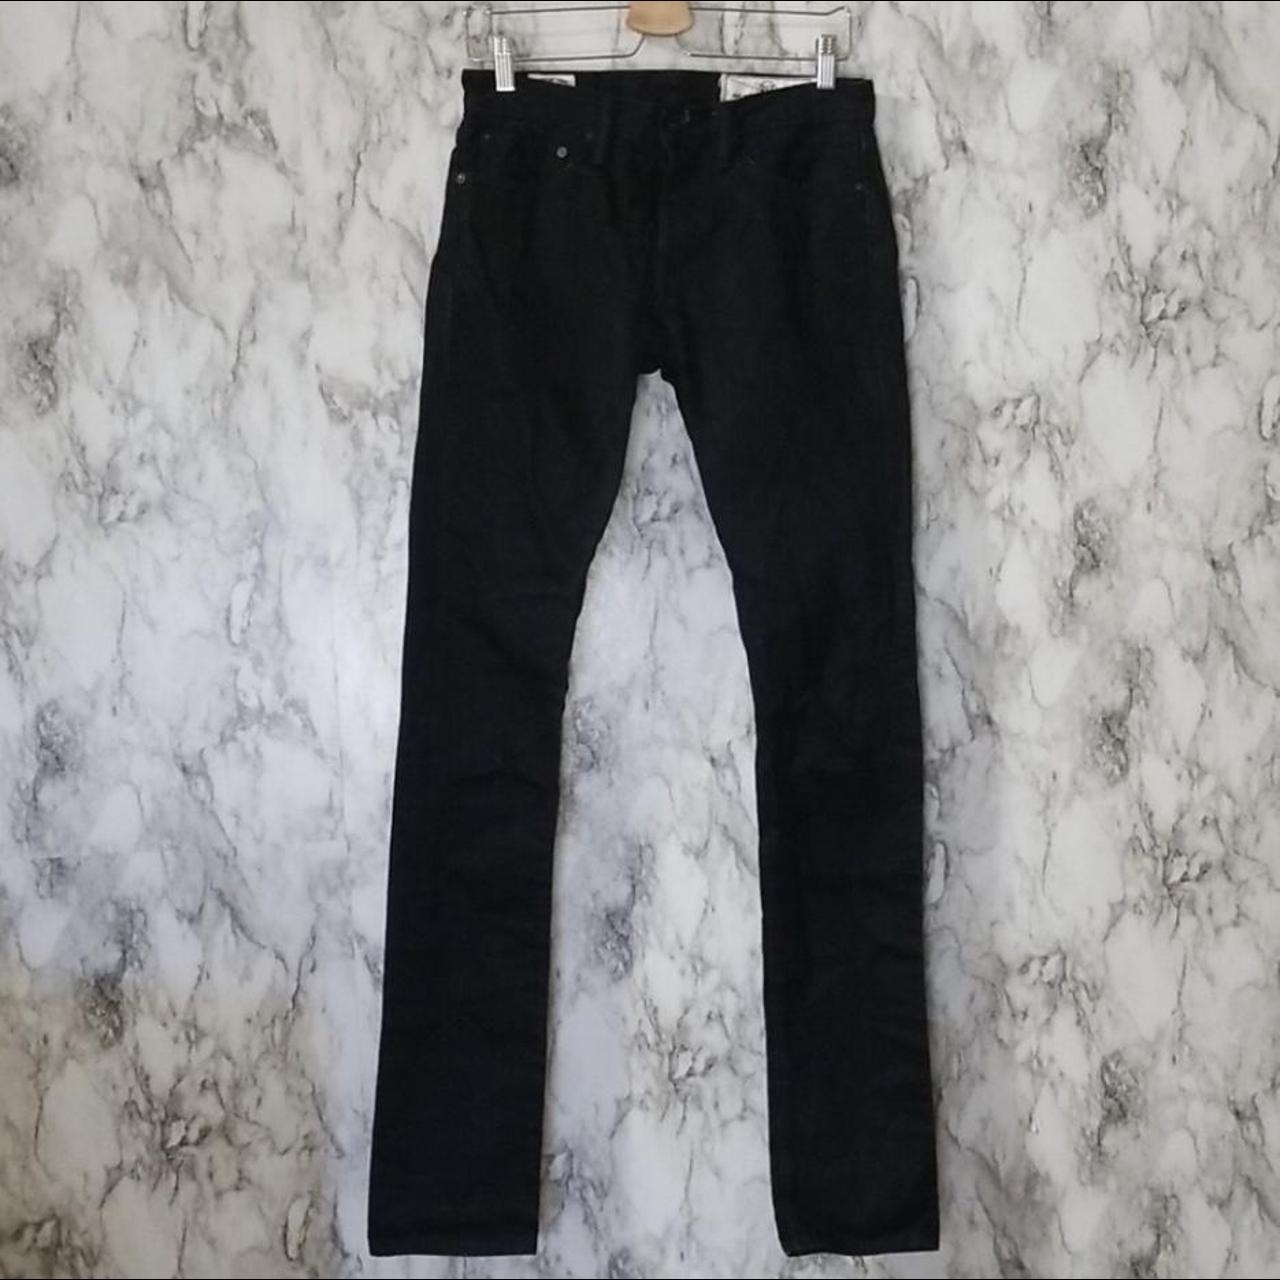 Product Image 1 - Rogue Territory Denim

Up for consideration